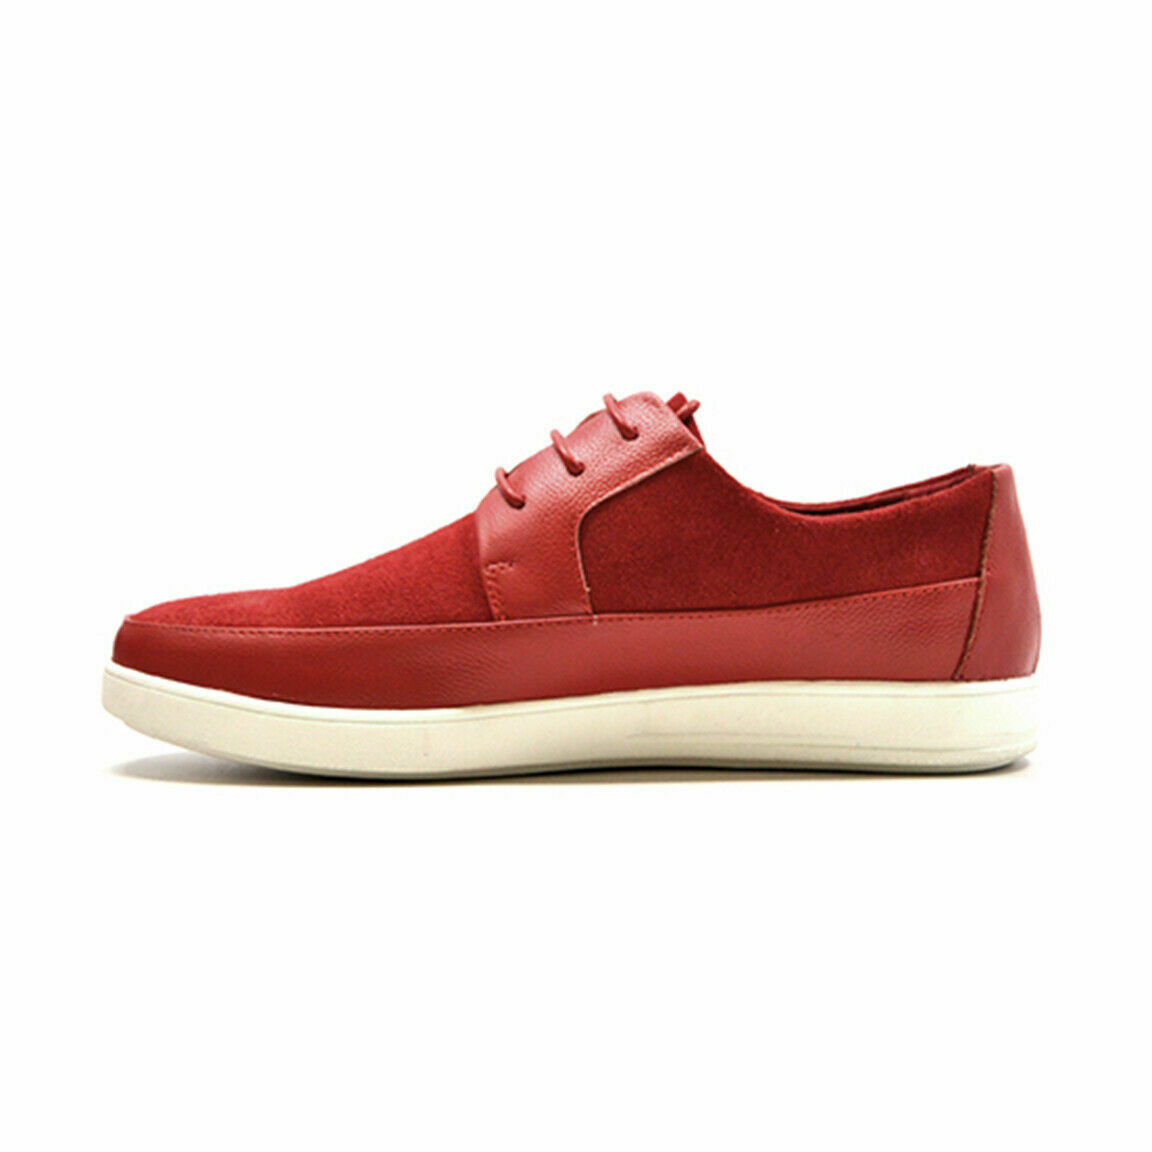 British Walkers Bally Style Men's Red Suede Oxfords - Casual Shoes